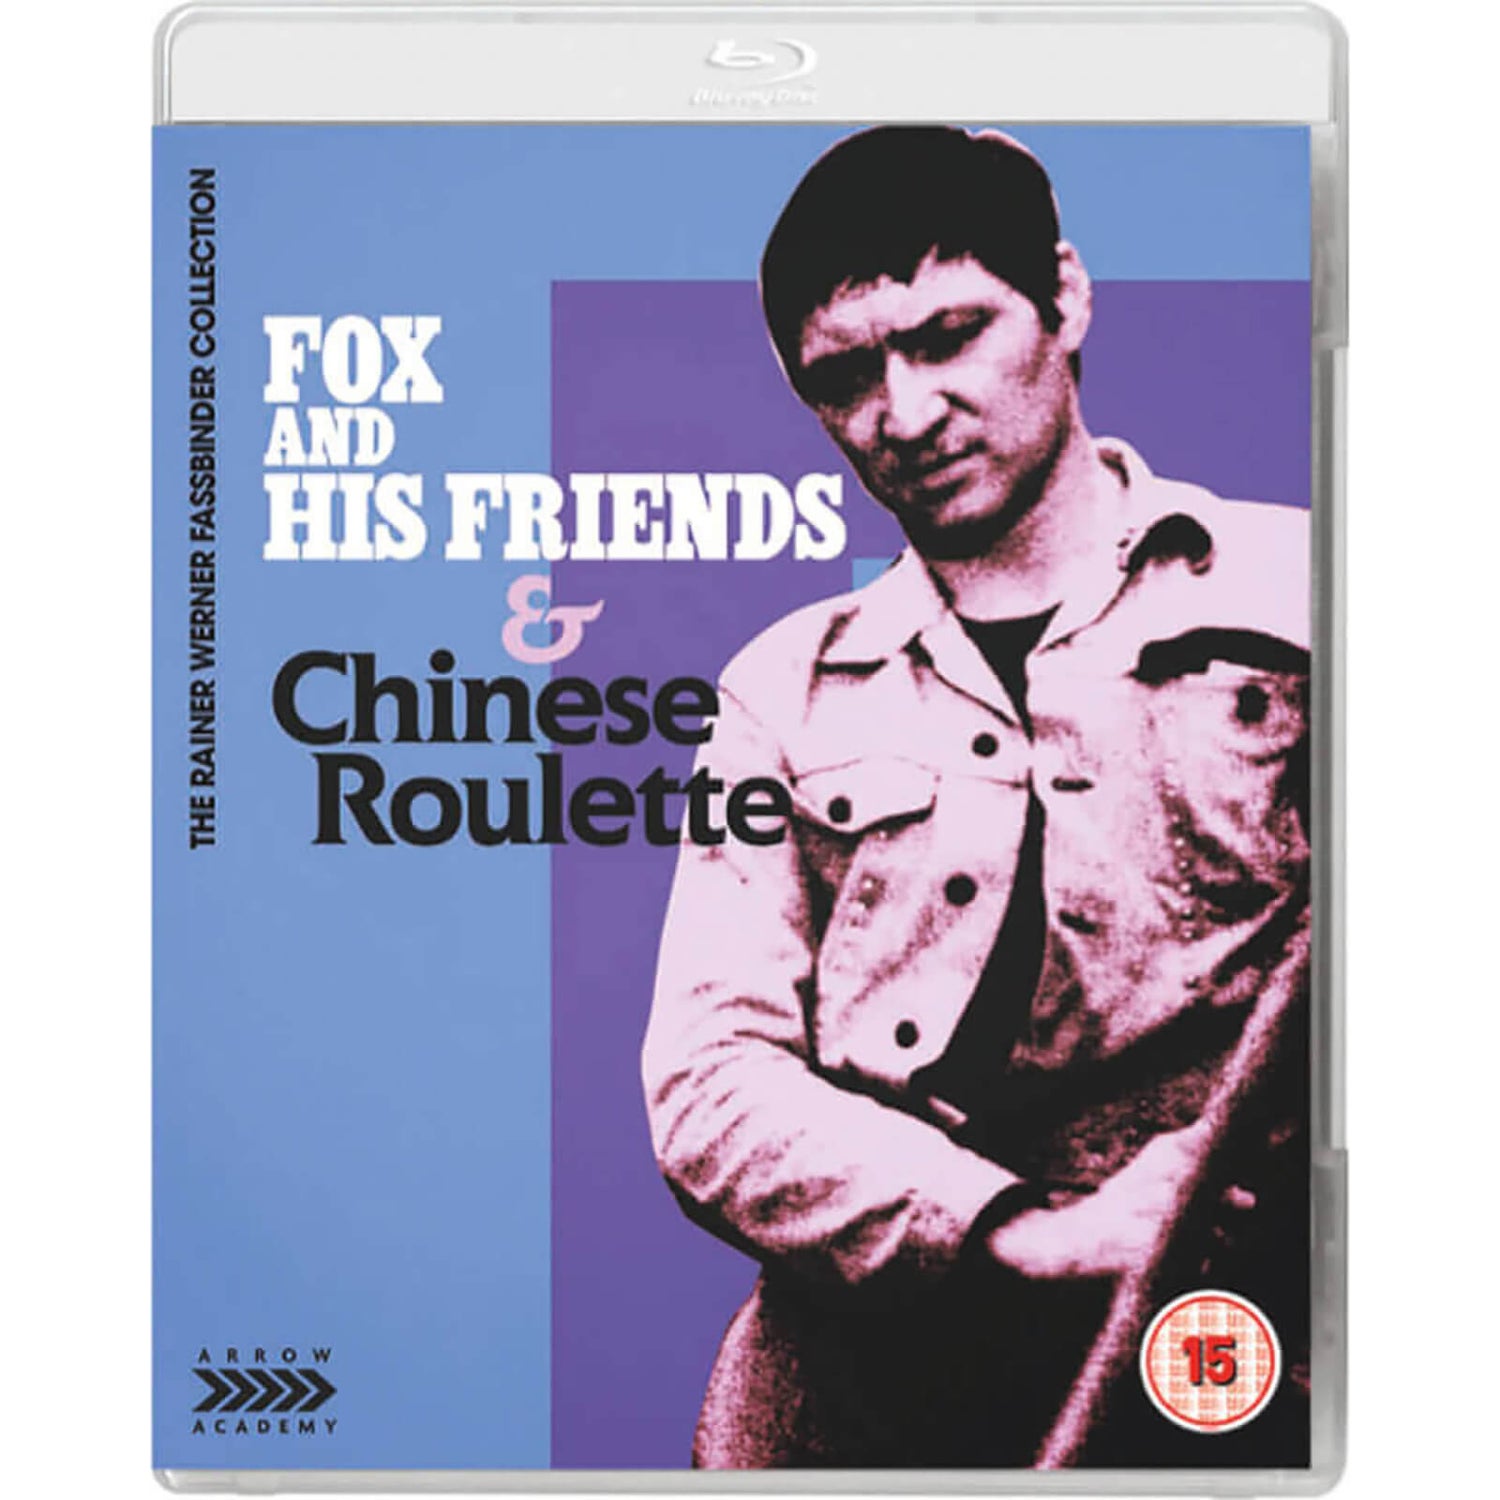 Fox And His Friends & Chinese Roulette Blu-ray